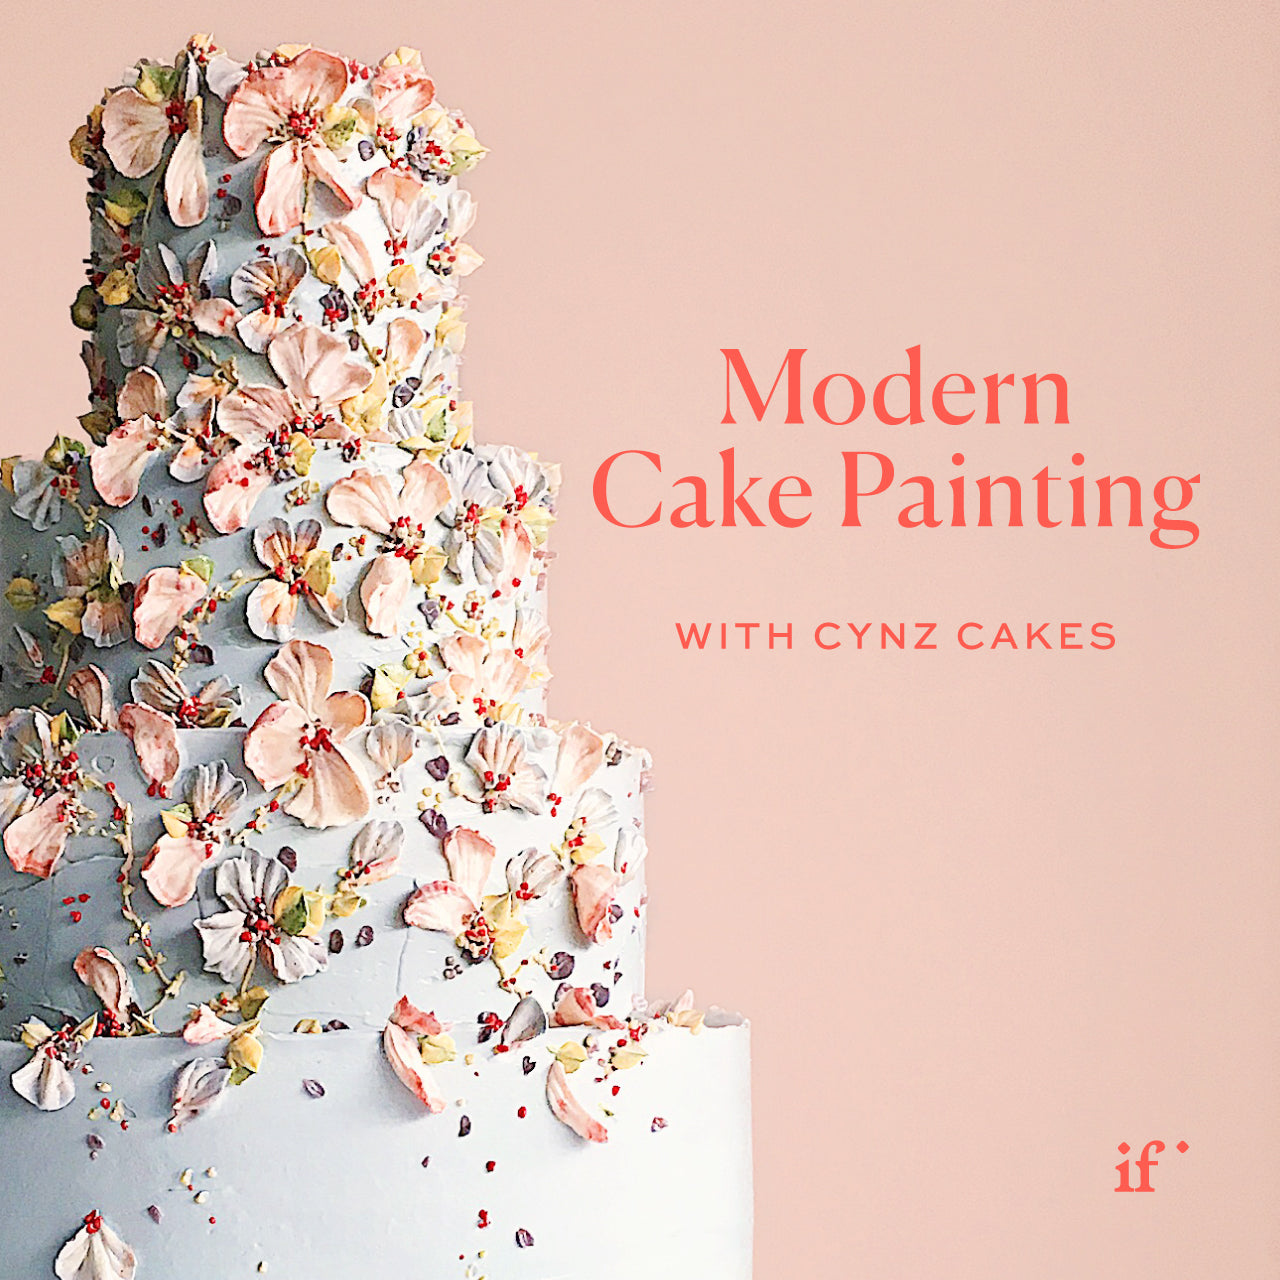 Modern Cake Painting with Cynz Cakes (EEGPP21) - 9 payments of $69